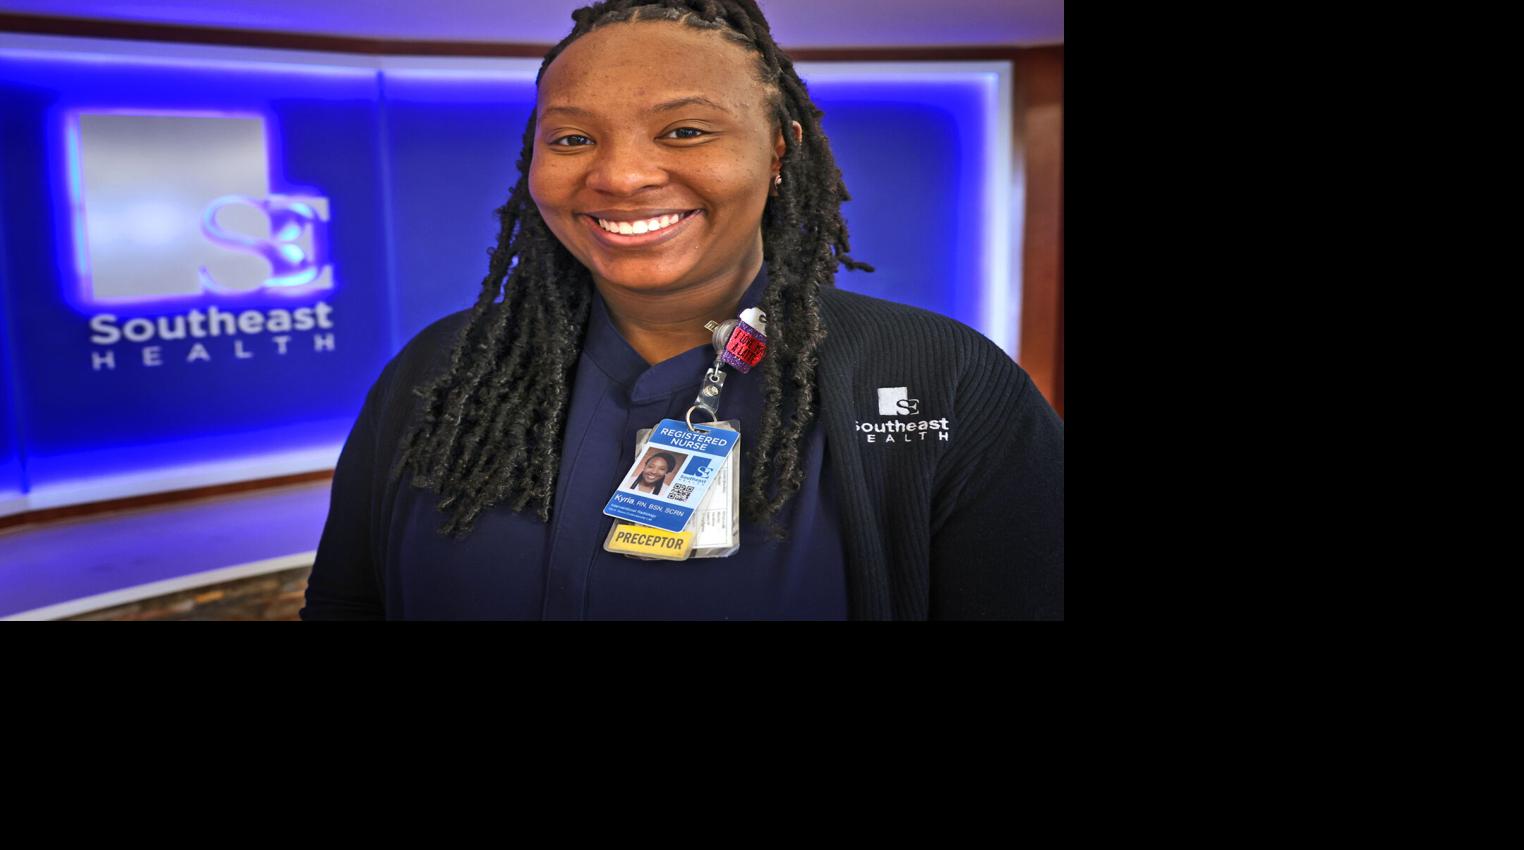 Heart of Health Care honoree: Kyria Neal inspired by nurses who cared for  her grandad